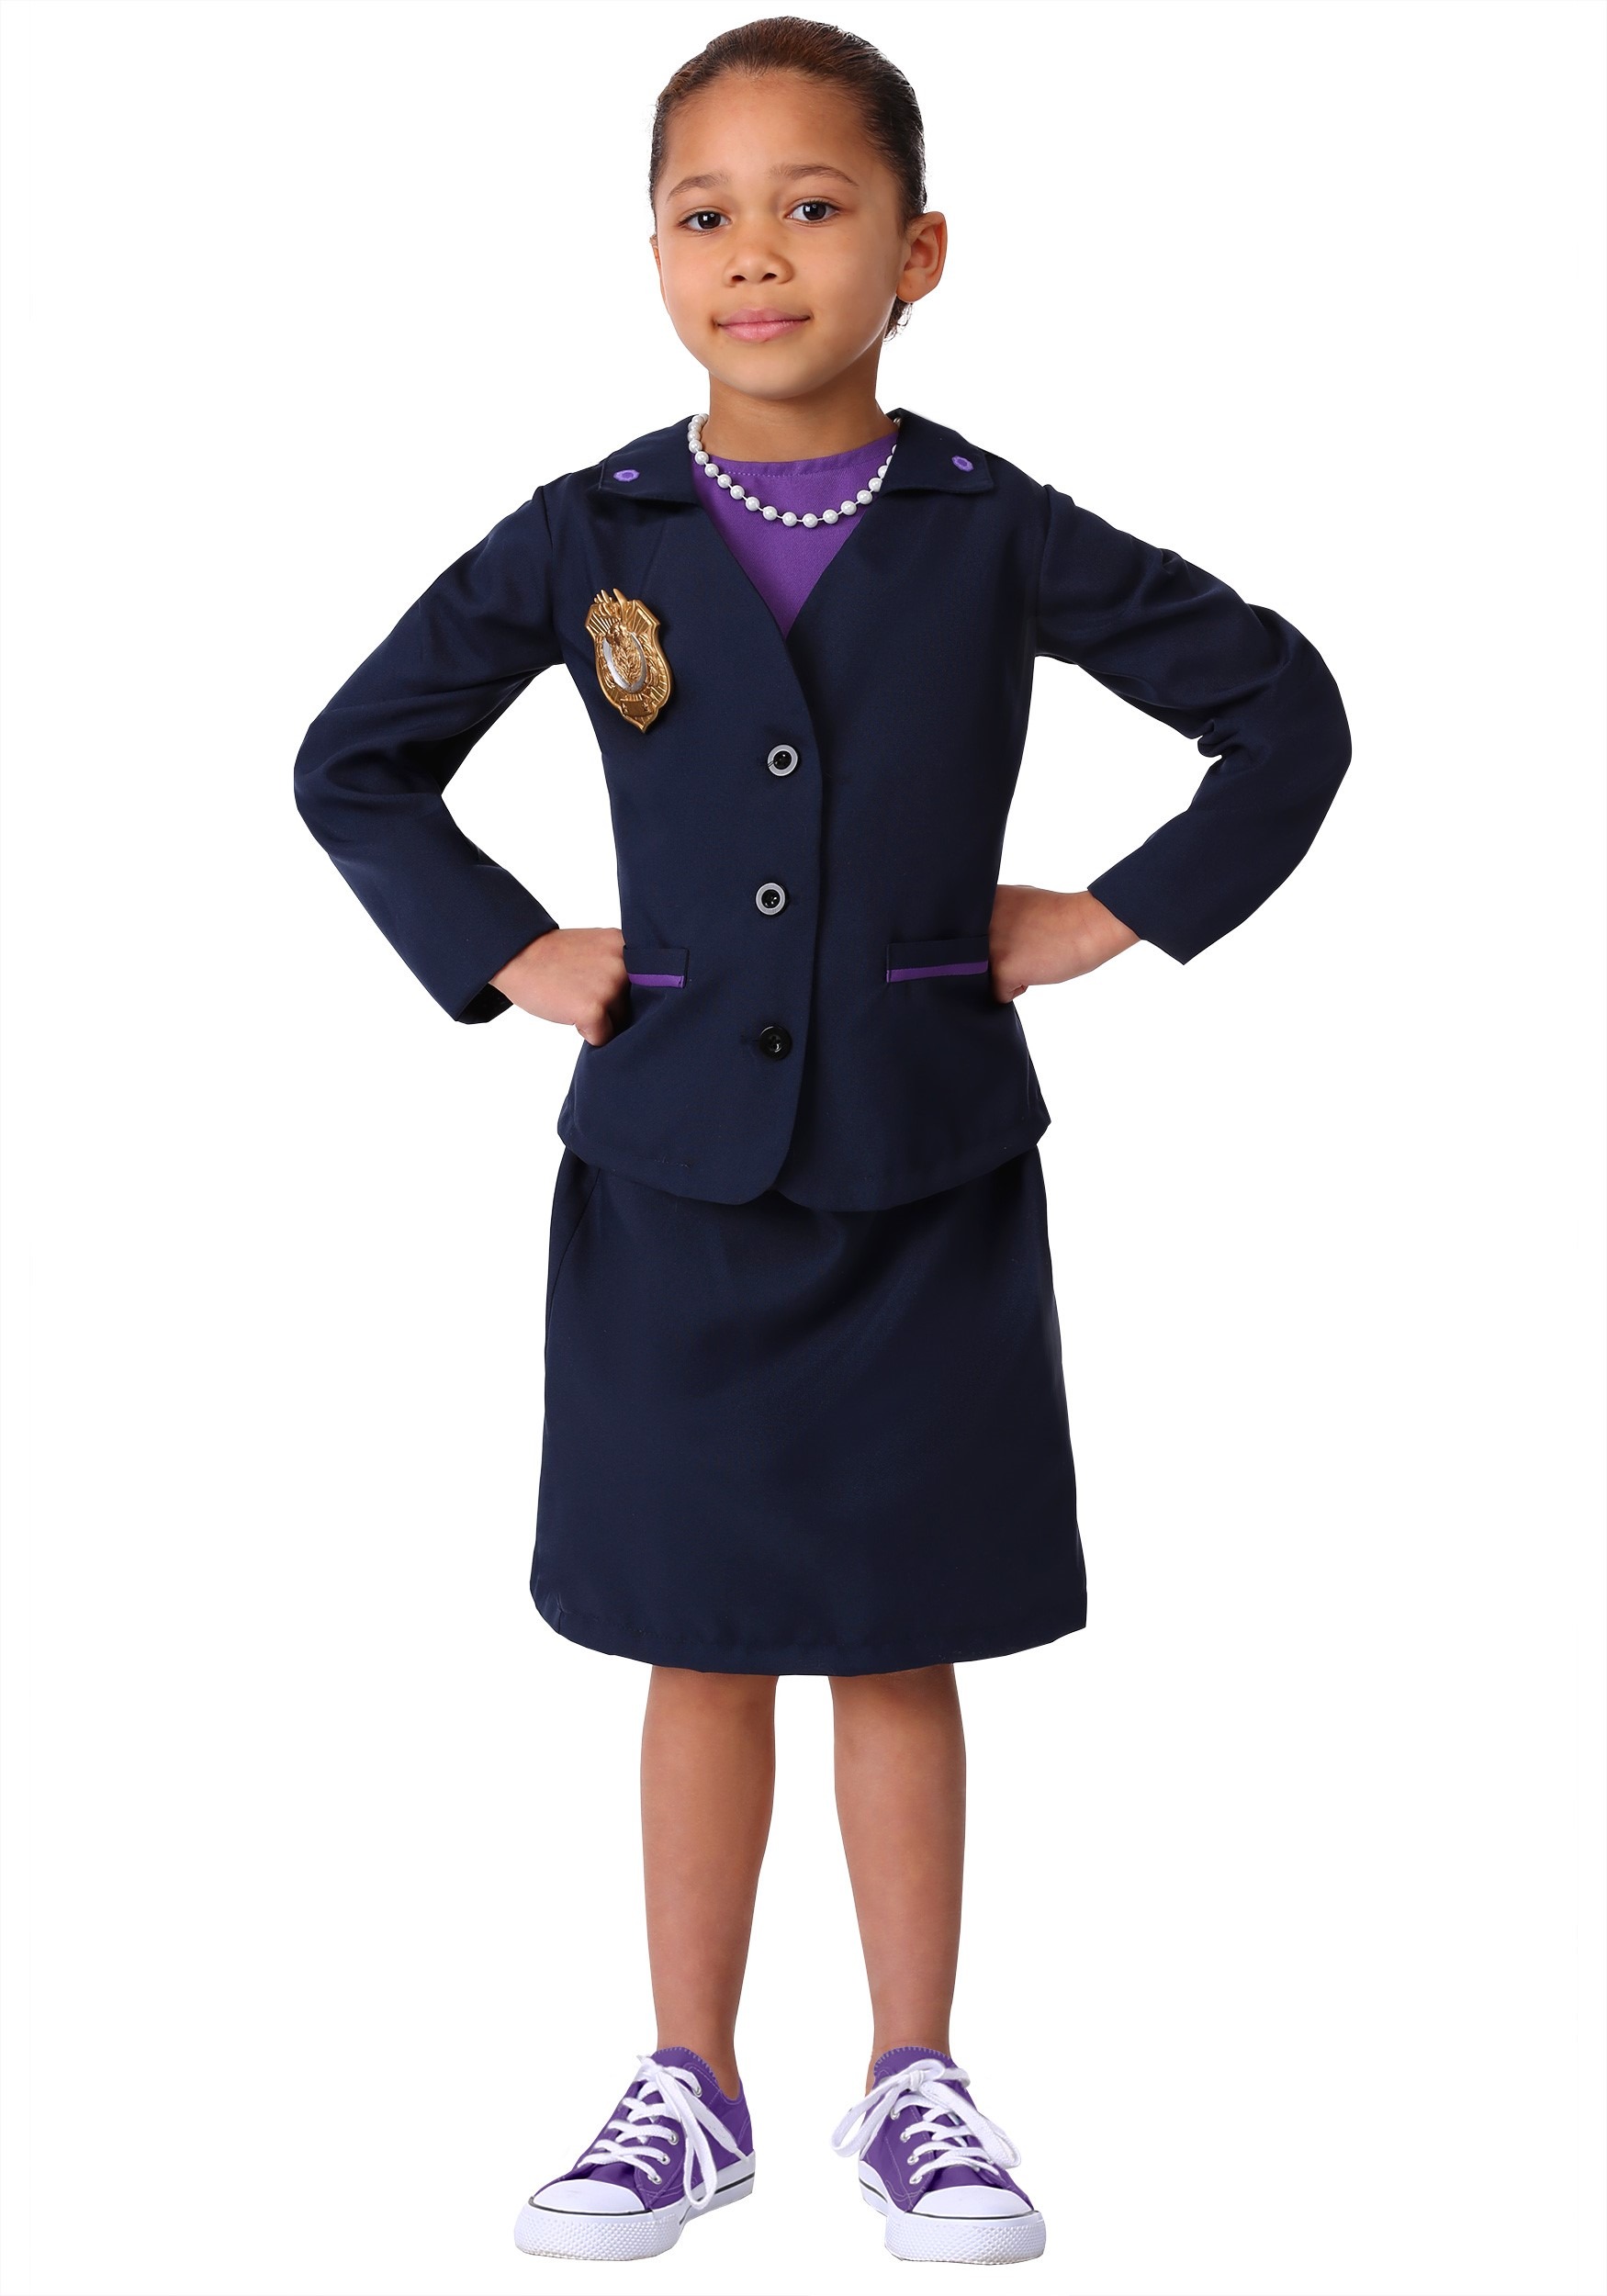 Odd Squad Ms. O Navy Suit Costume for Girls